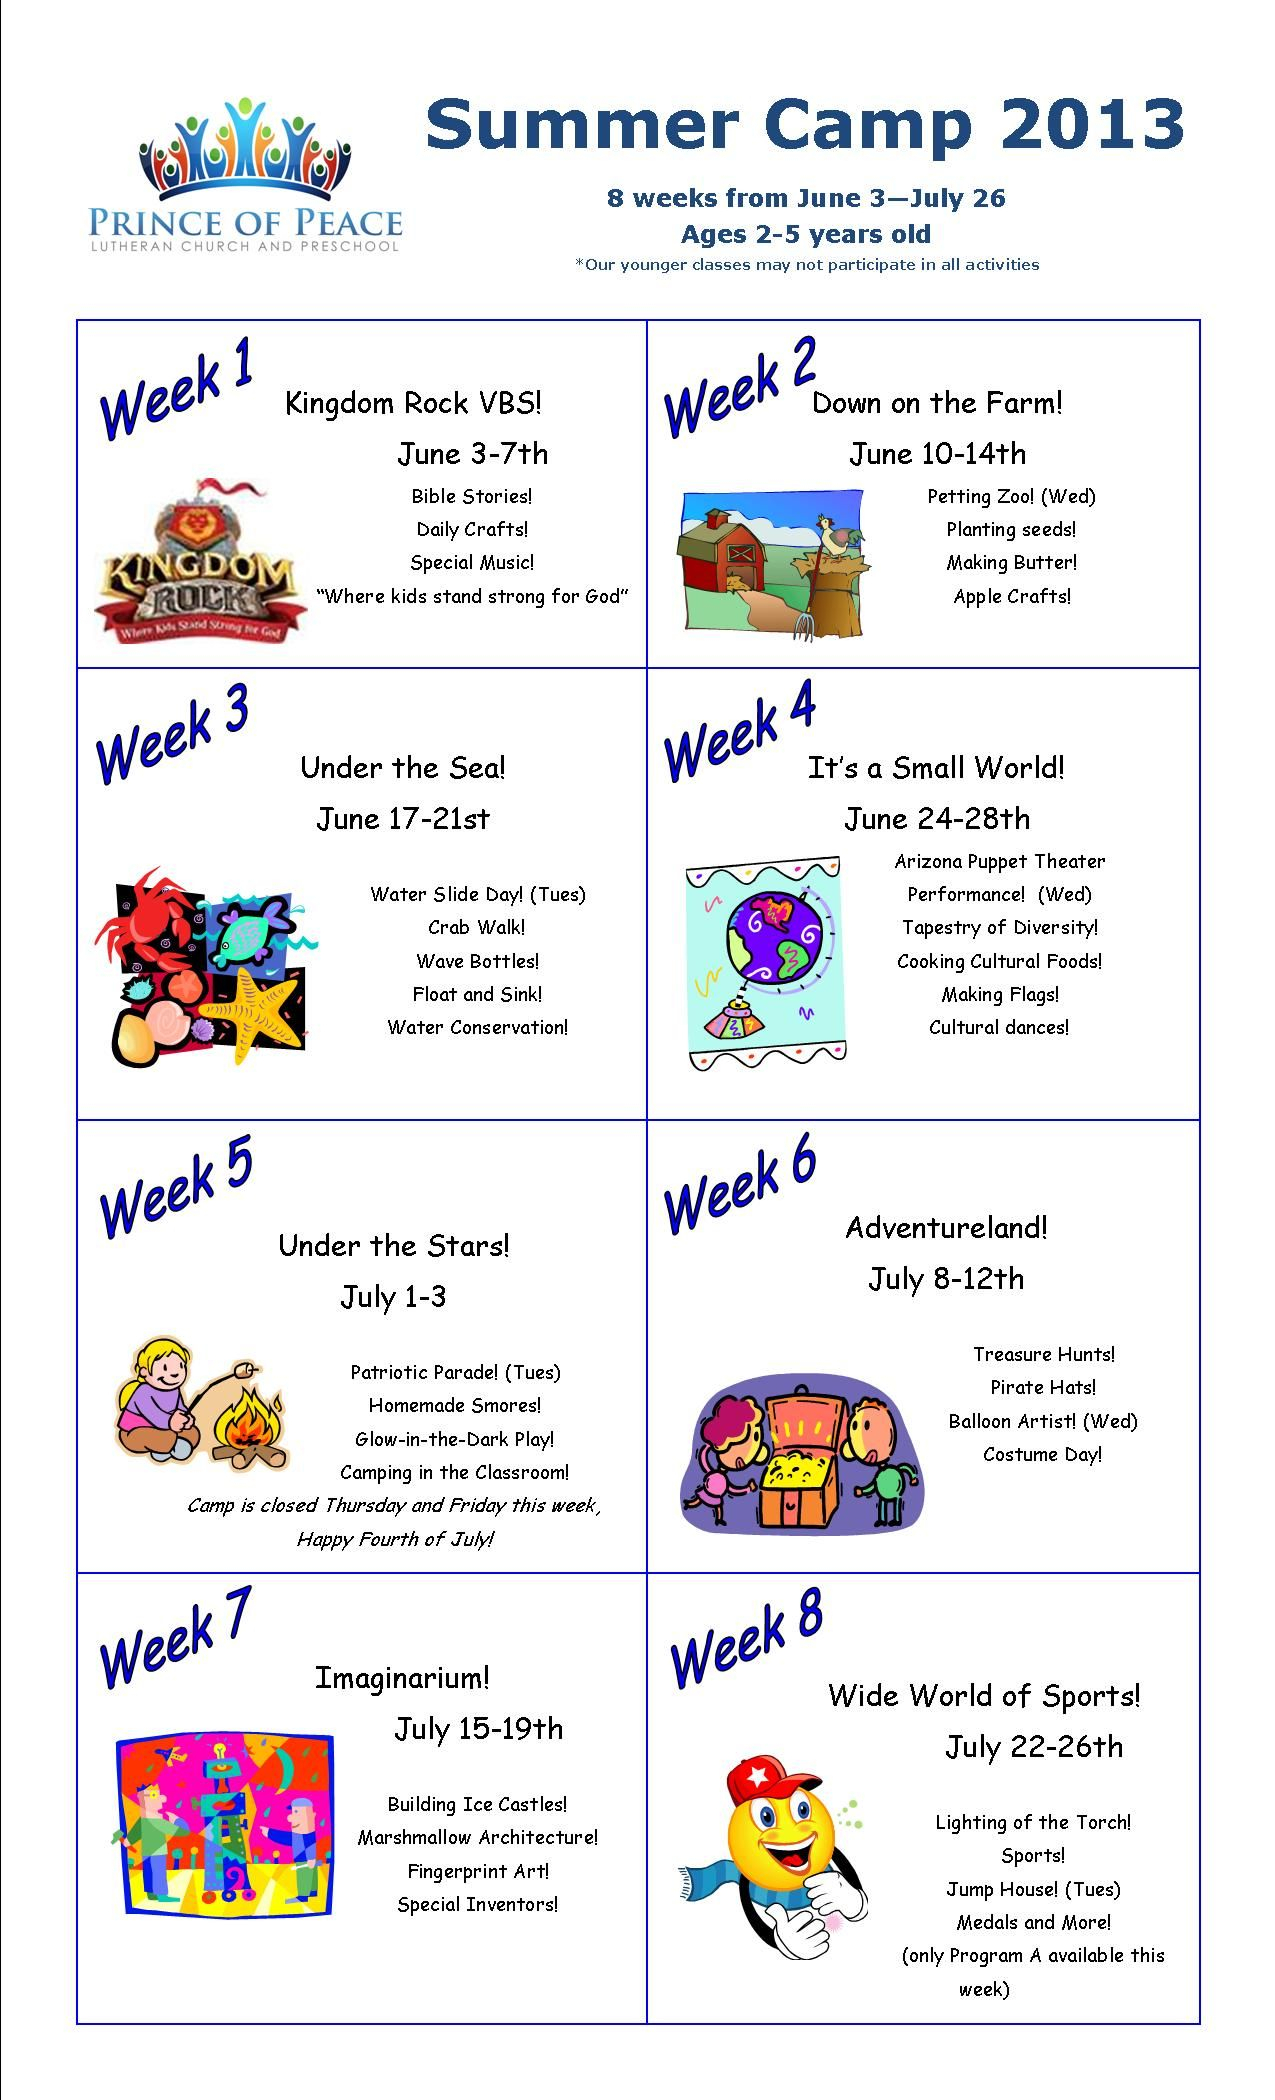 10 Most Popular Ideas For Summer Camp Themes summer camp calendar 2013 i love this idea to devote a week to 5 2024